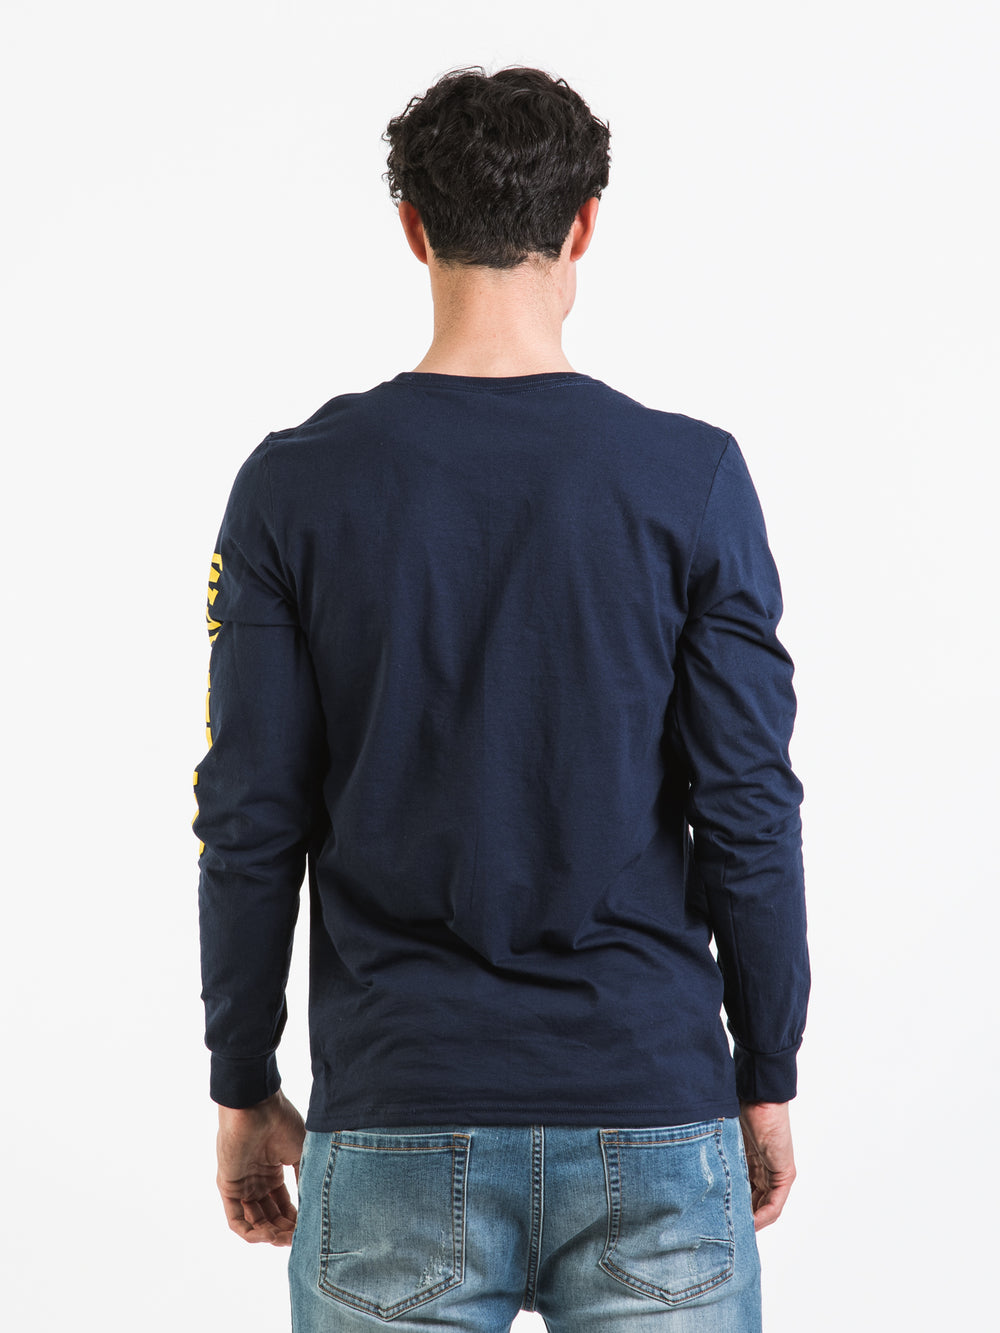 RUSSELL MICHIGAN LONG SLEEVE TEE - CLEARANCE